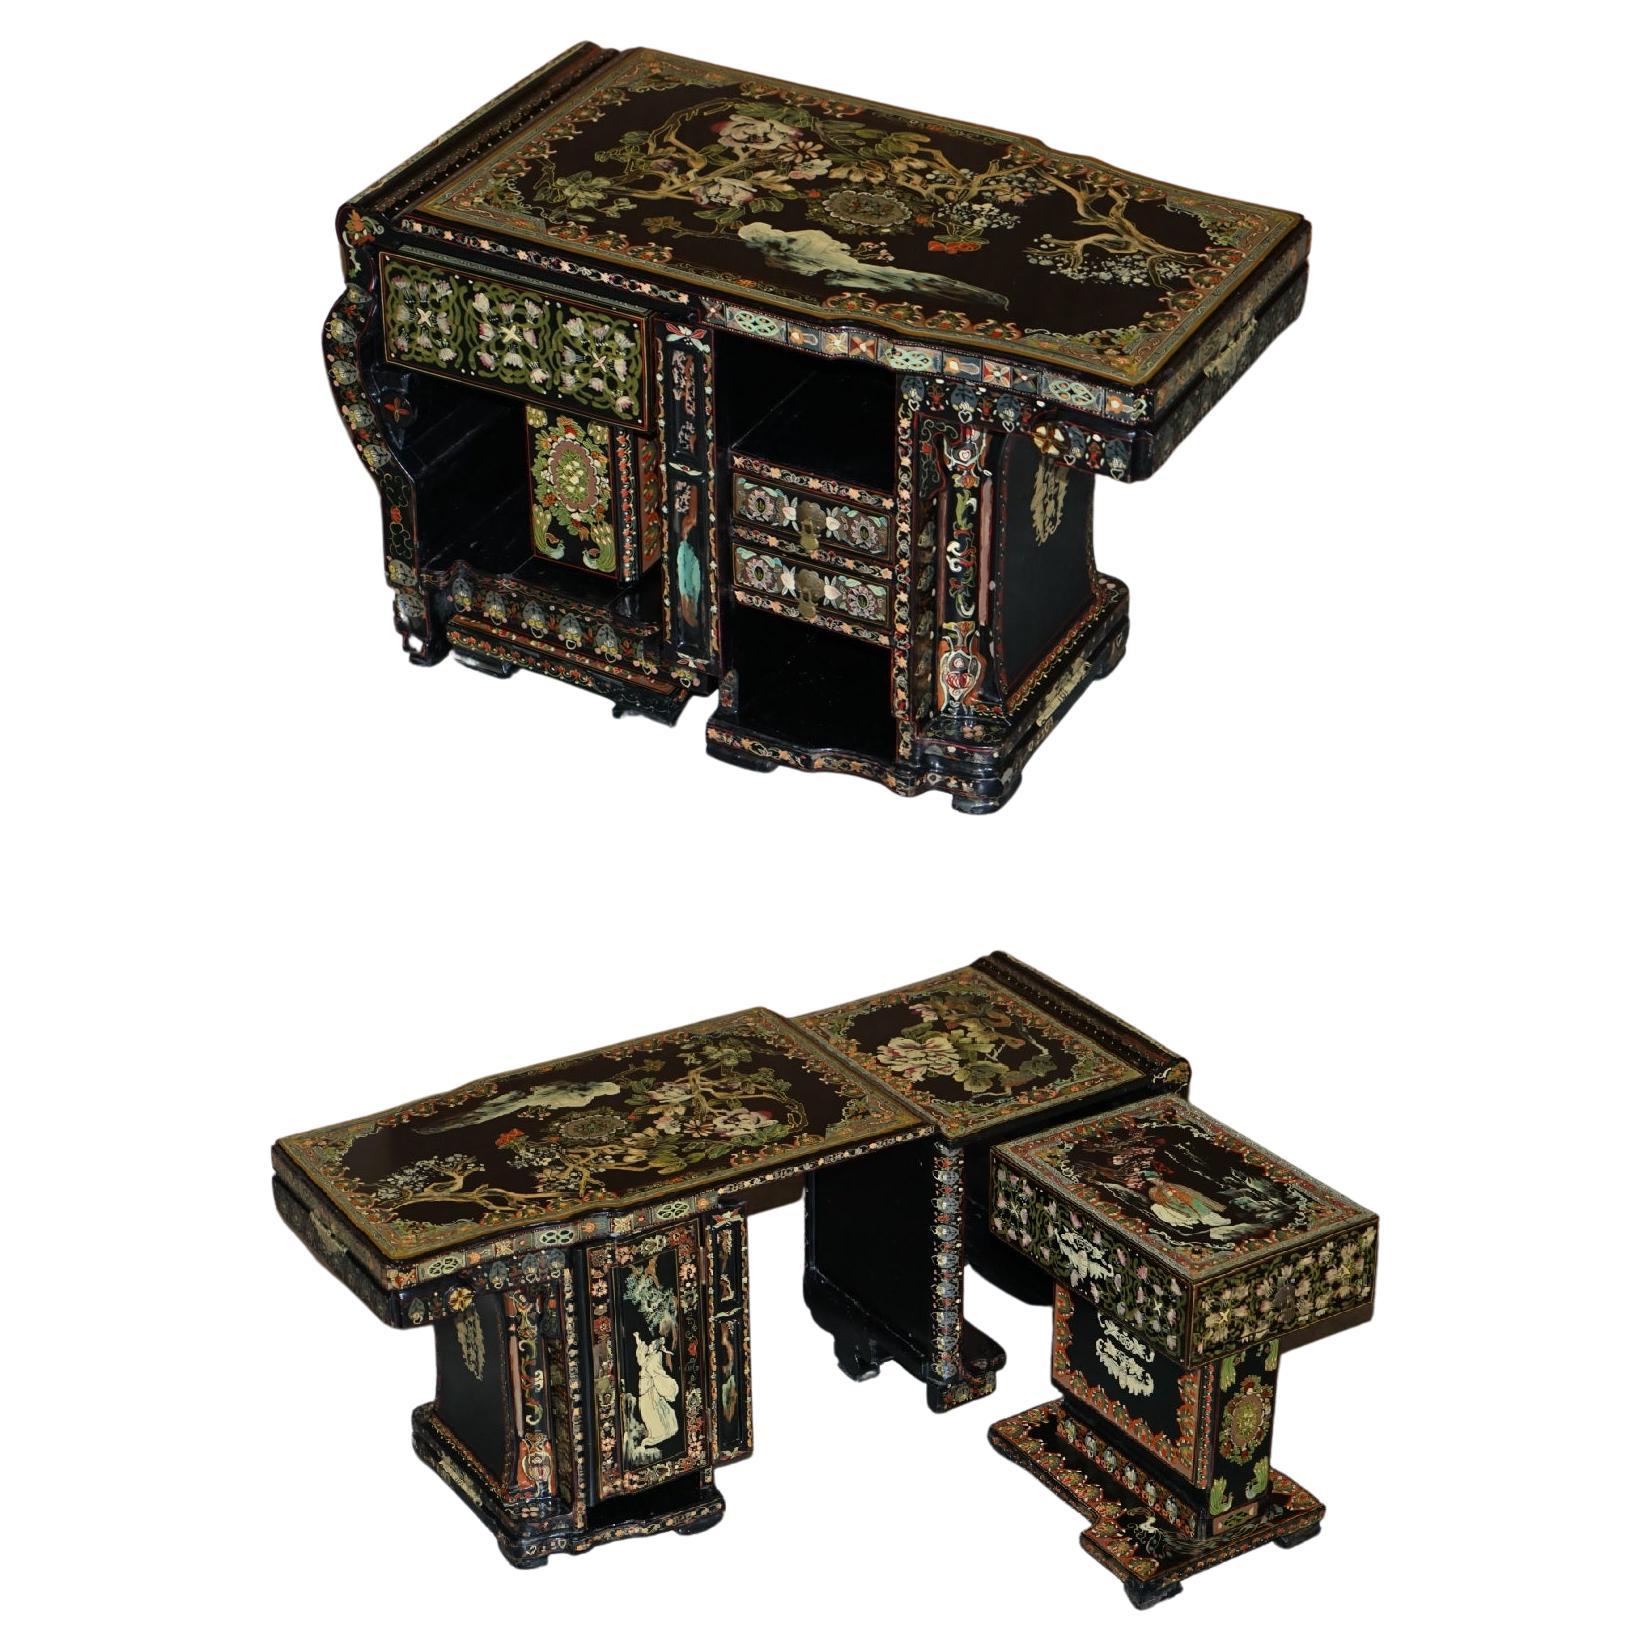 Unusal Vintage Metomorphic Oriental Chinese Nest of Side Tables with Drawers